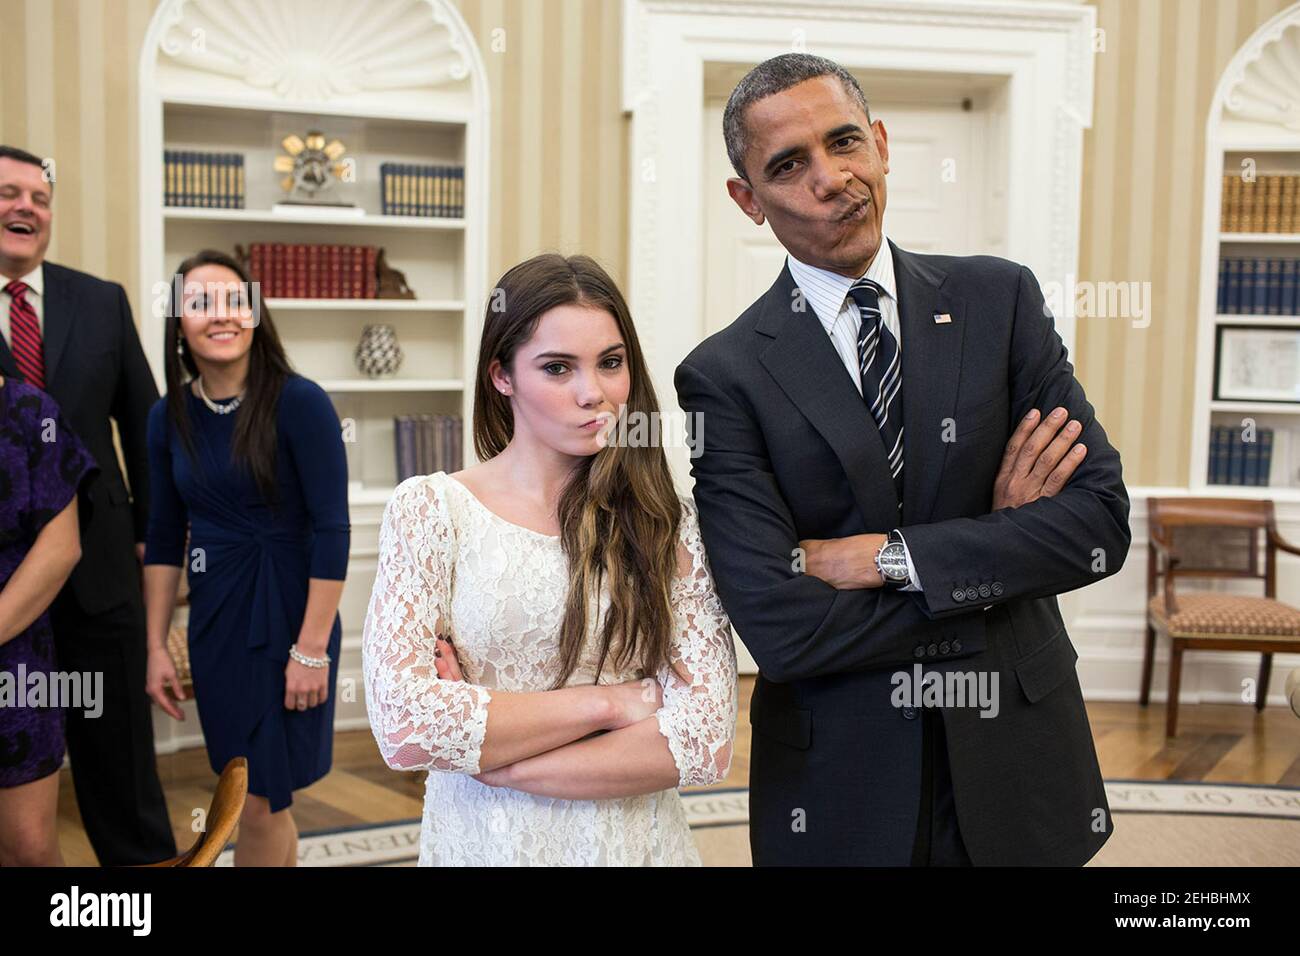 Nov. 15, 2012 The President had just met with the U.S. Olympics gymnastics team, who because of a previous commitment had missed the ceremony earlier in the year with the entire U.S. Olympic team. The President suggested to McKayla Maroney that they recreate her 'not impressed' photograph before they departed. Stock Photo